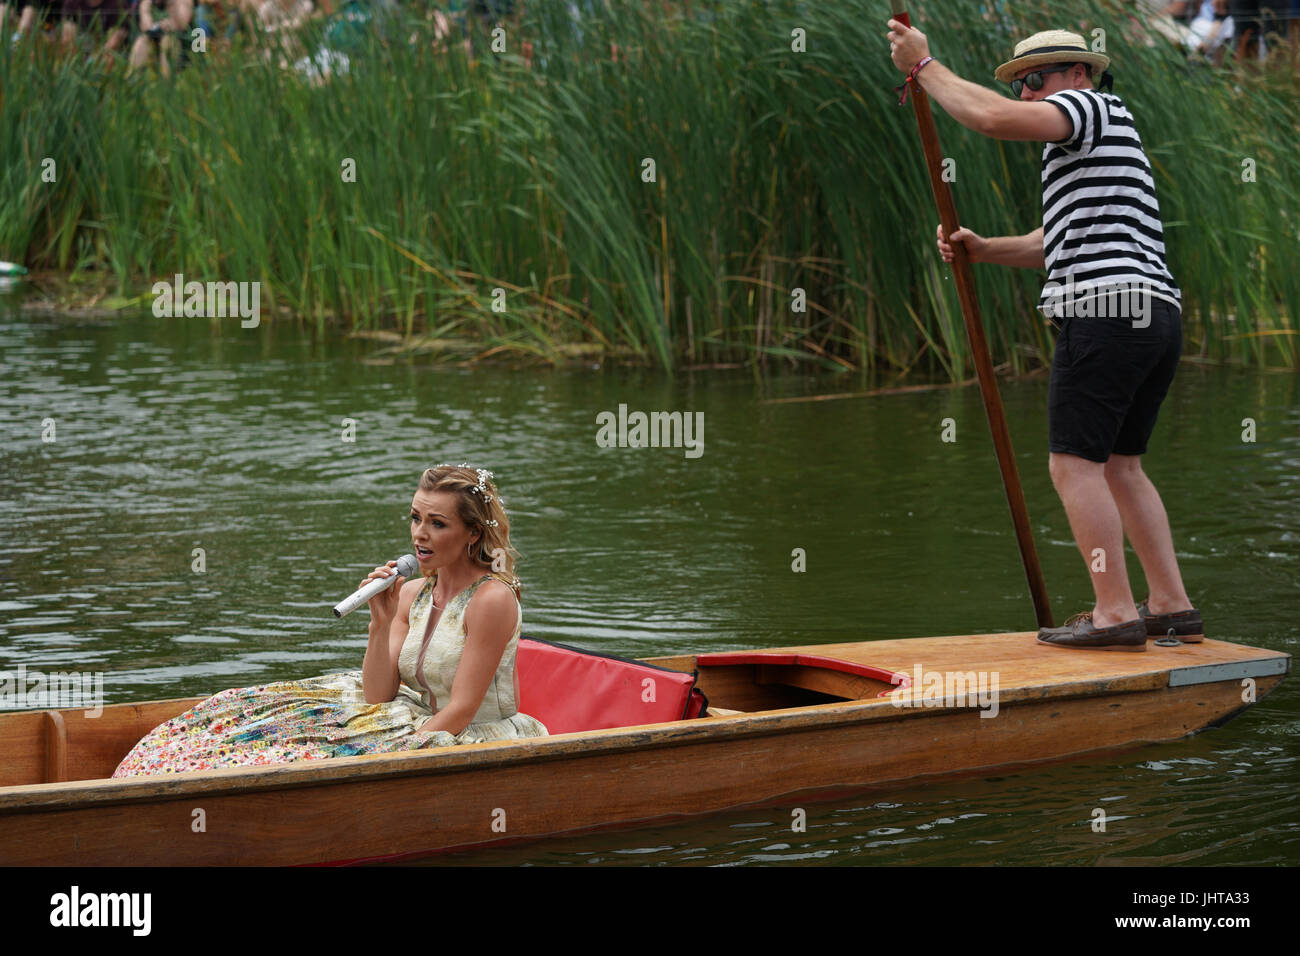 Latitude Festival, UK. 16th July, 2017. Katherine Jenkins singing in a punt before performing on the stage by the lake on day 4 (Sunday) of the 2017 Latitude festival in Henham Park, Southwold in Suffolk. Photo date: Sunday, July 16, 2017. Photo credit should read: Roger Garfield/Alamy Live News. Stock Photo